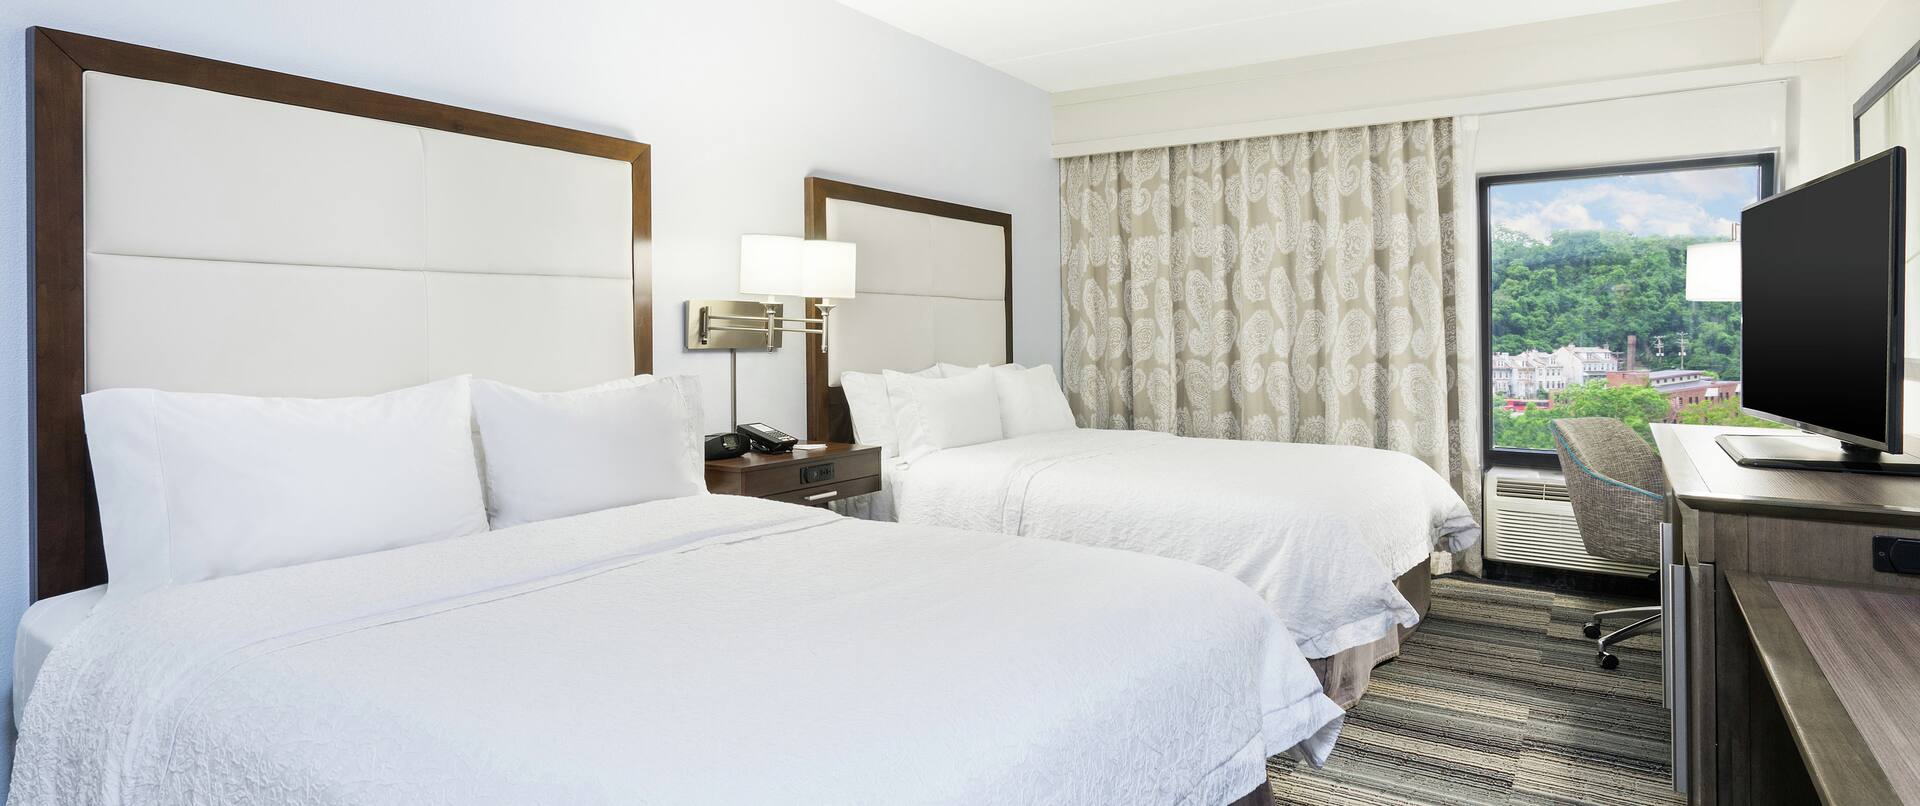 Queen Guestroom with Two Queen Beds, Room Technology, Work Desk, and Outside View